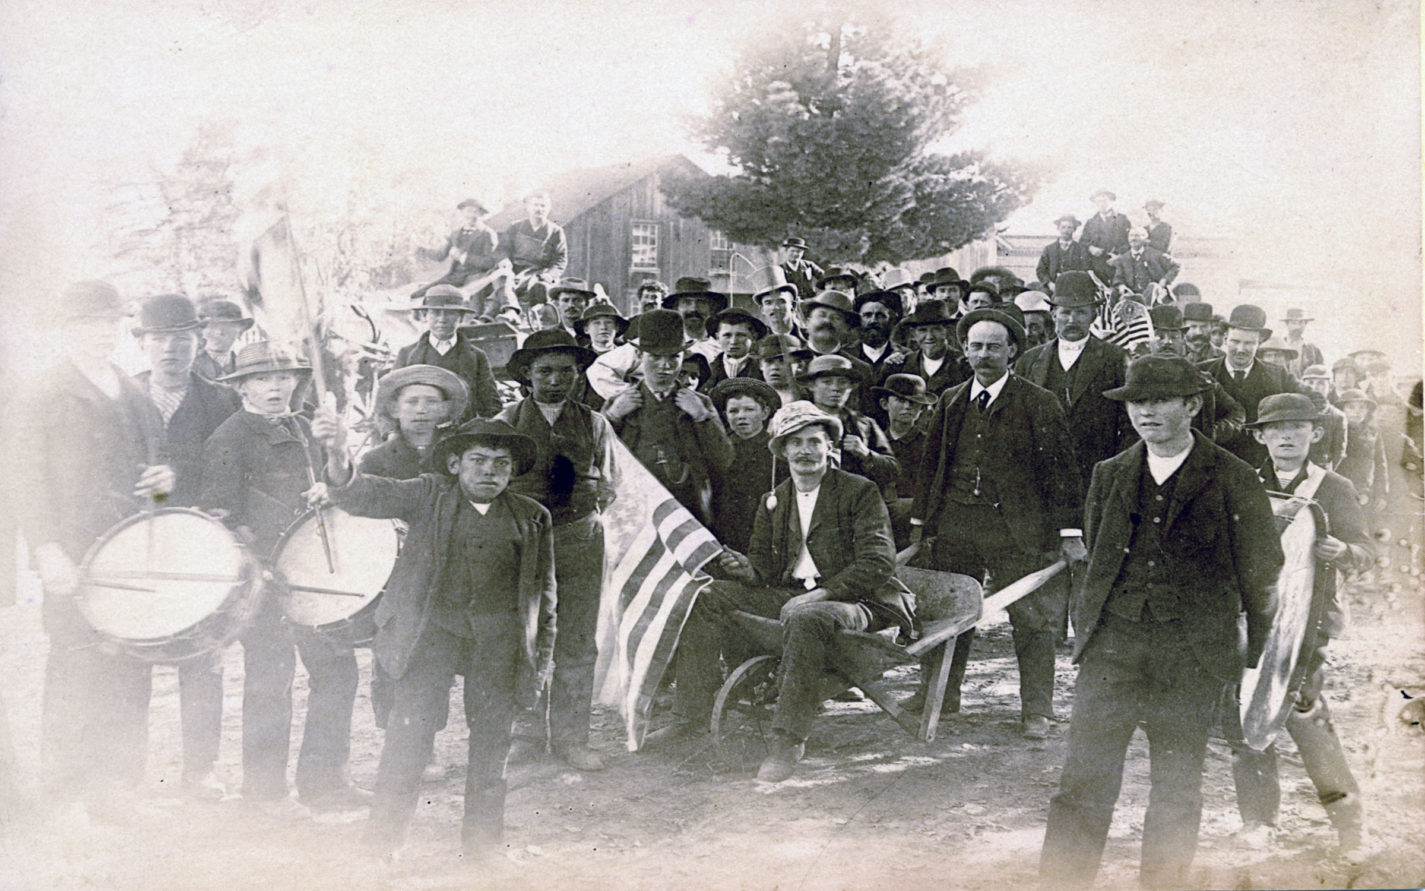 Group of men and boys with flags and drums circa 1880s